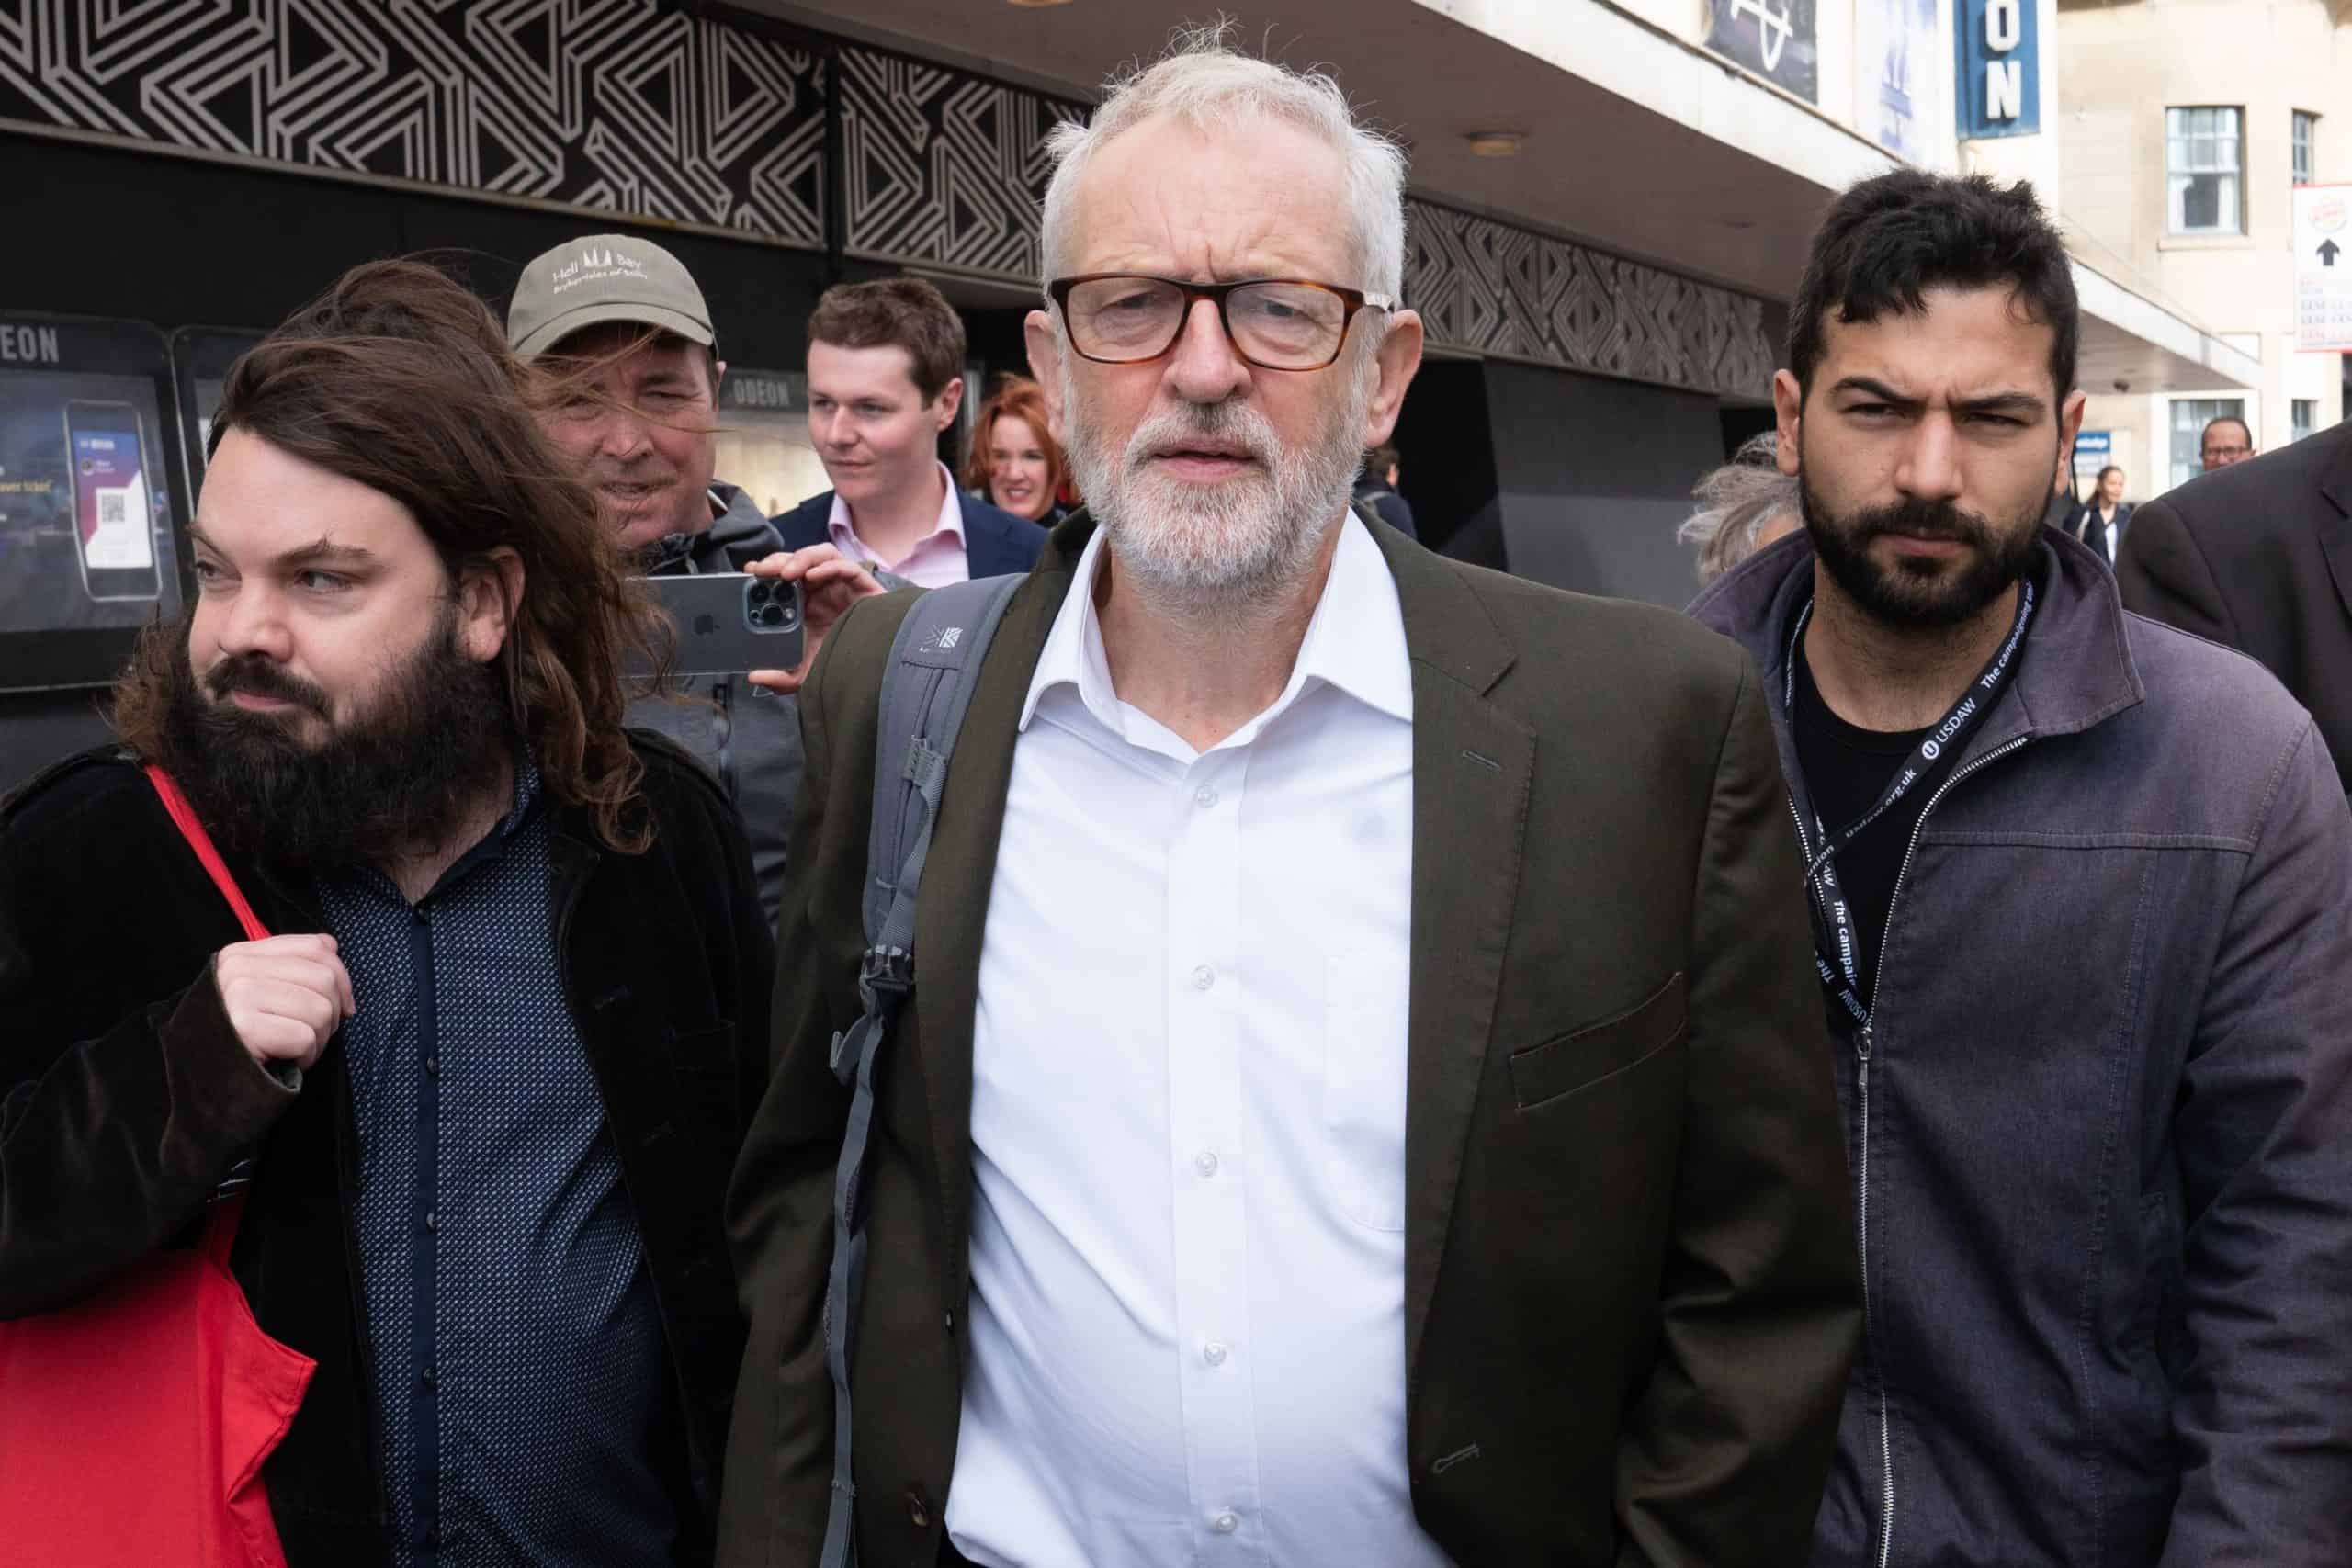 Jeremy Corbyn signals he could run for London mayor